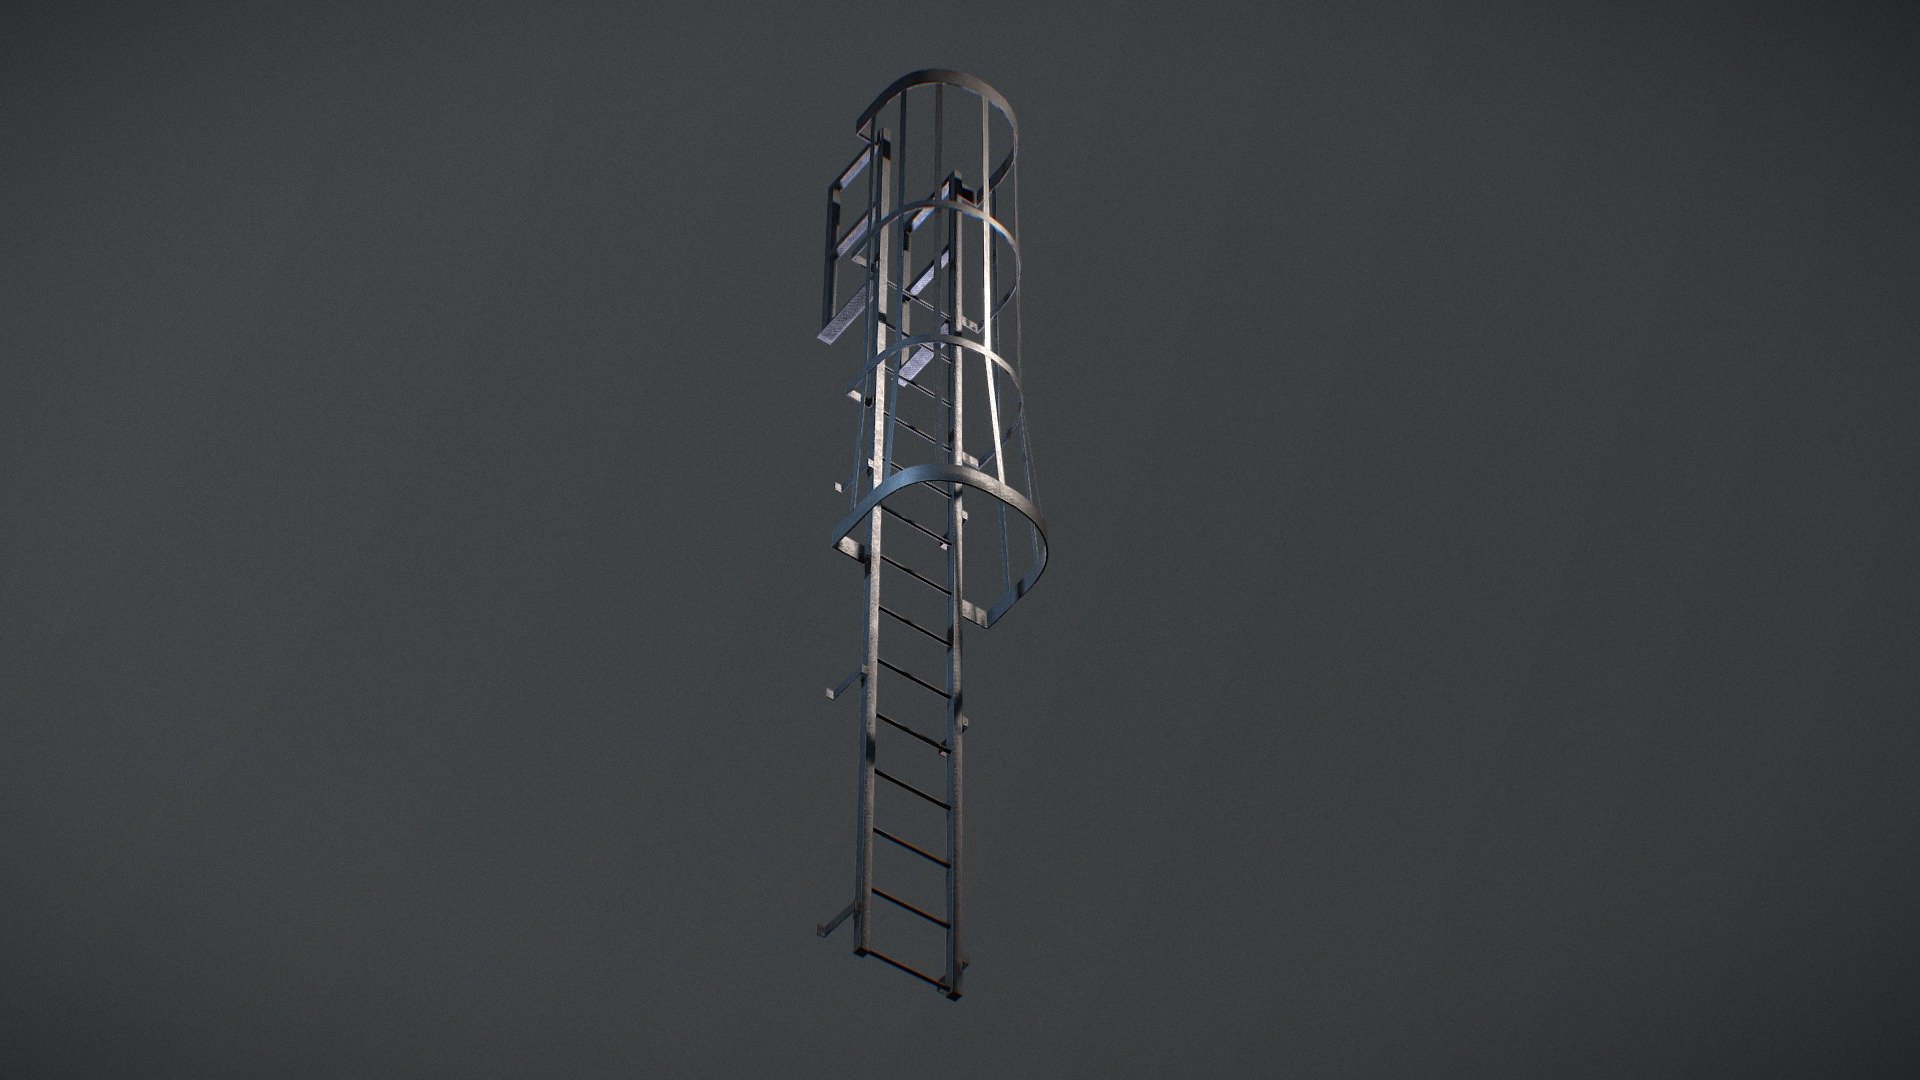 Ladder Cage - Safety Step 3d model ready for VirtualReality(VR),Augmented Reality(AR),games and other render engines.This lowpoly 3d model of Chair is equipped with 4k resolution textures.The PBR_Maps includes- albedo,roughness,metallic and normal 3d model